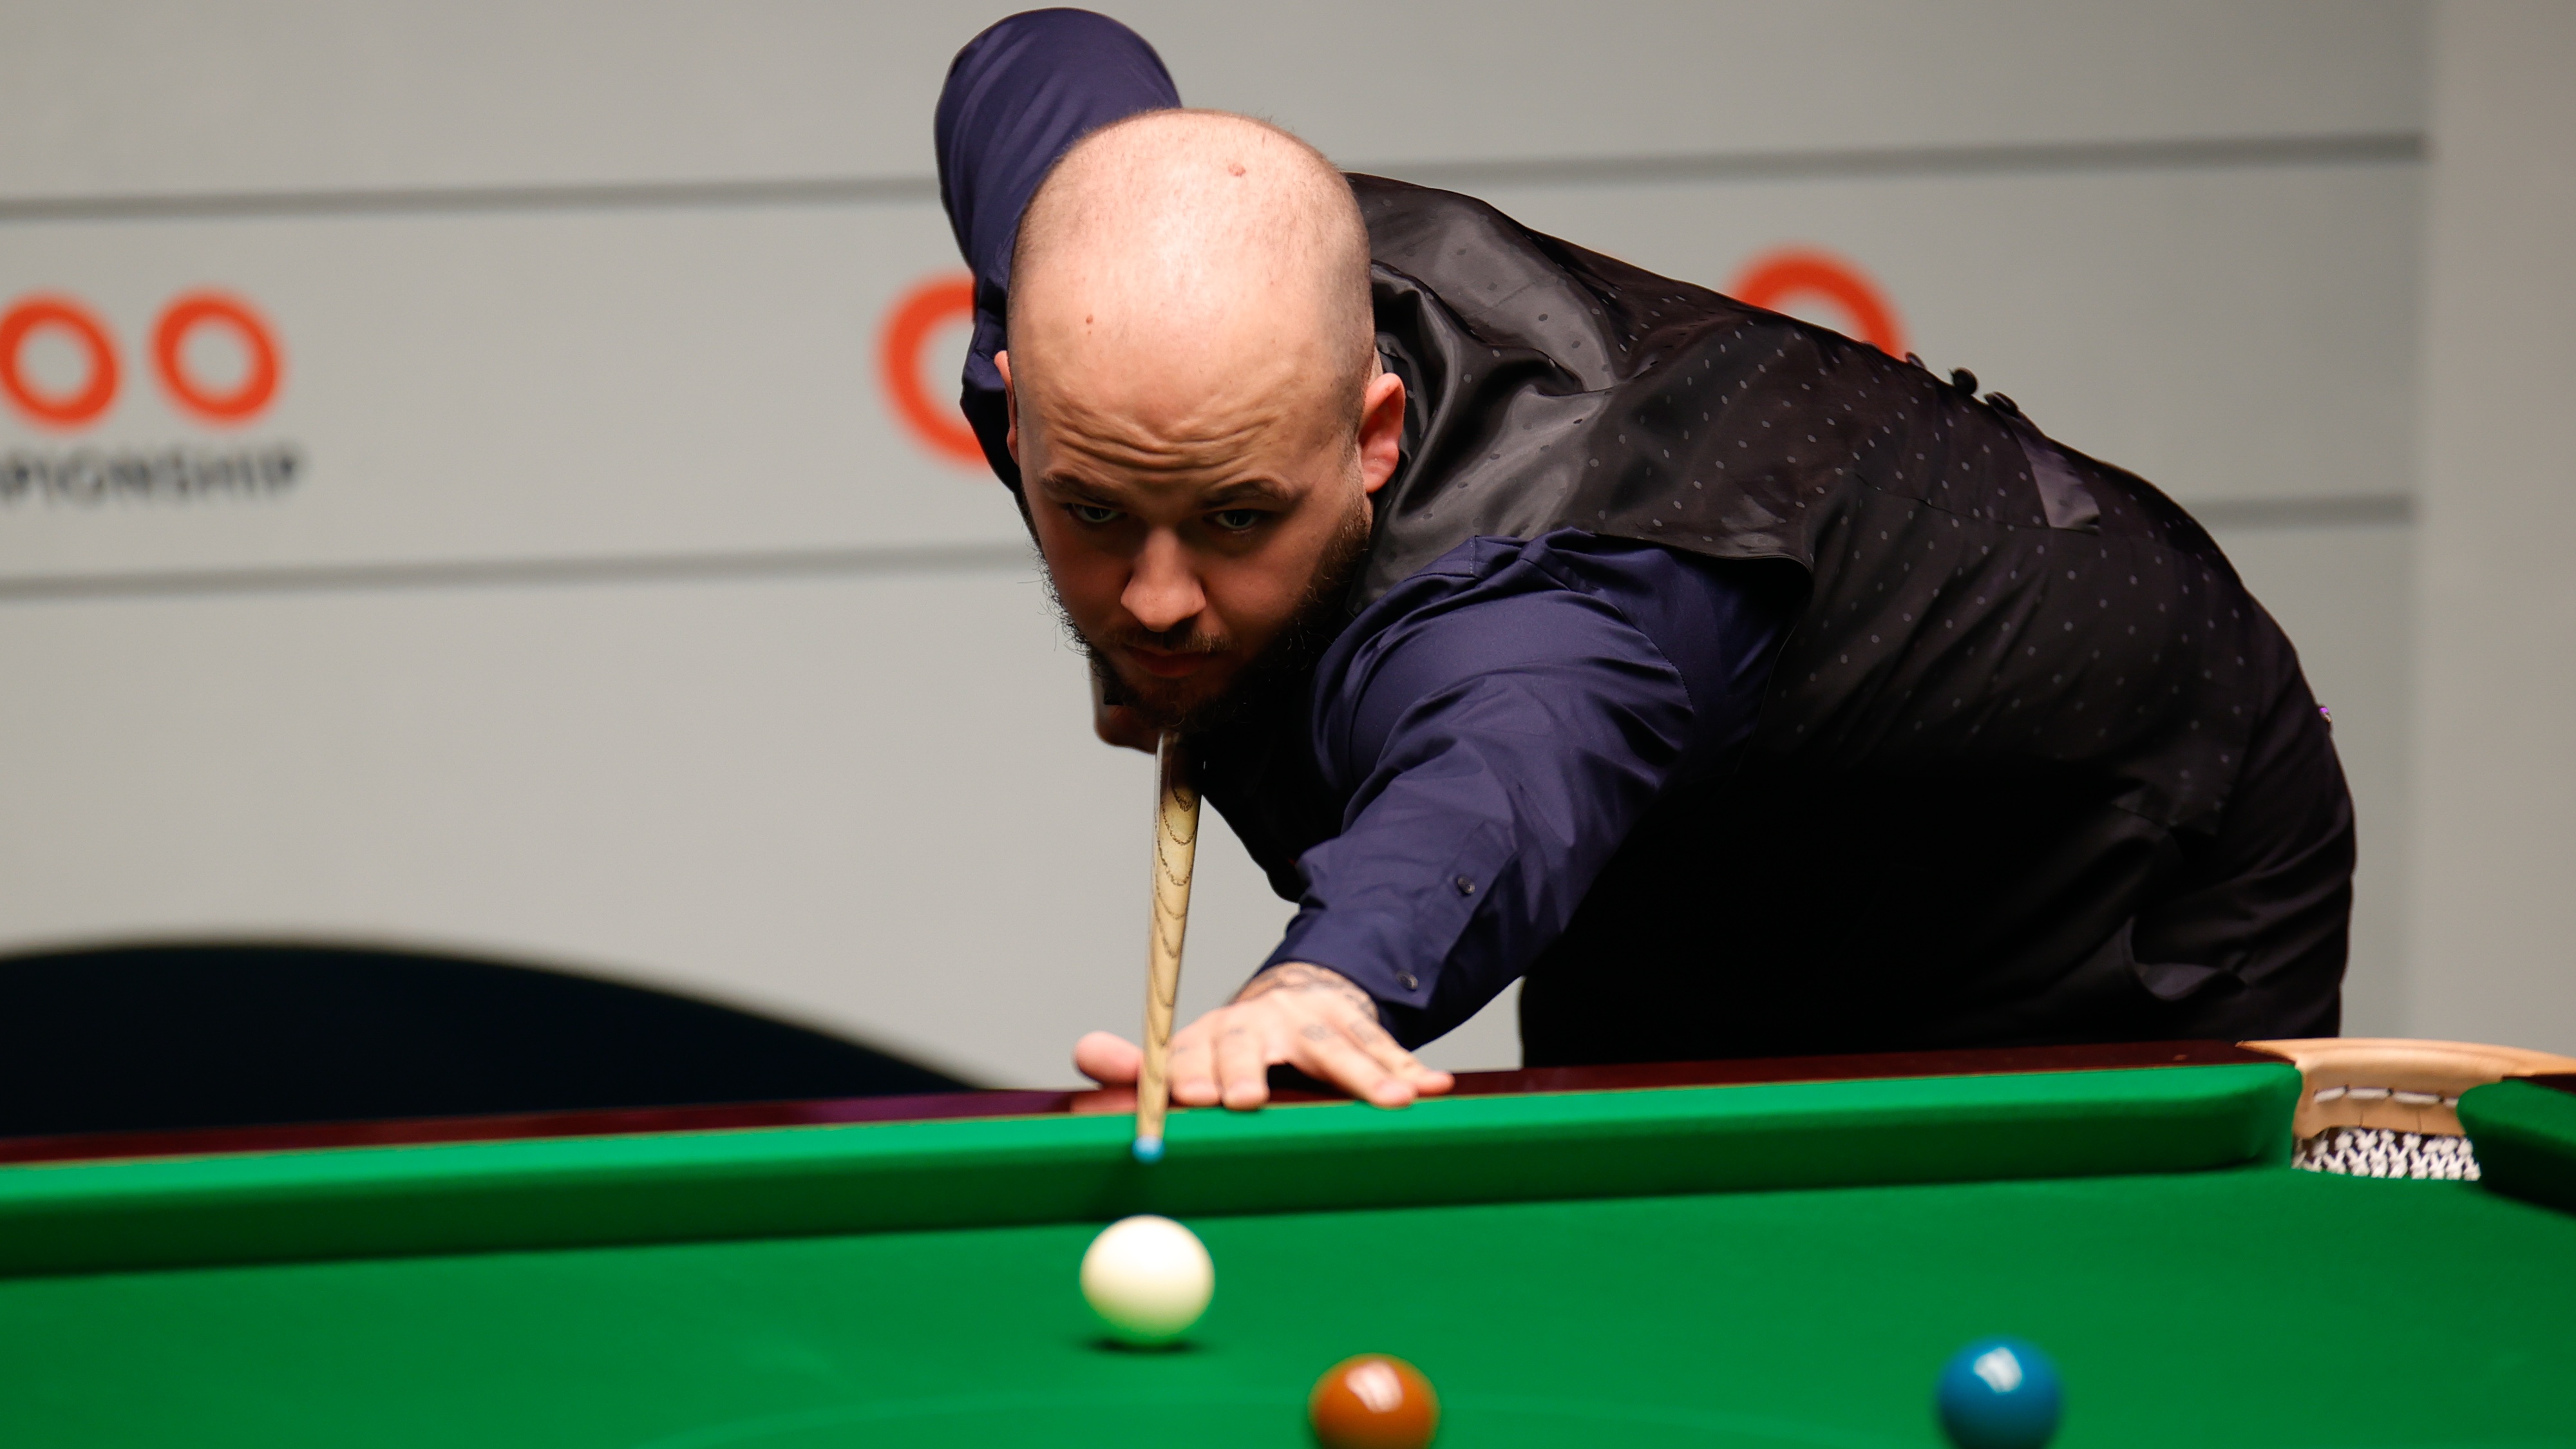 world snooker streaming live